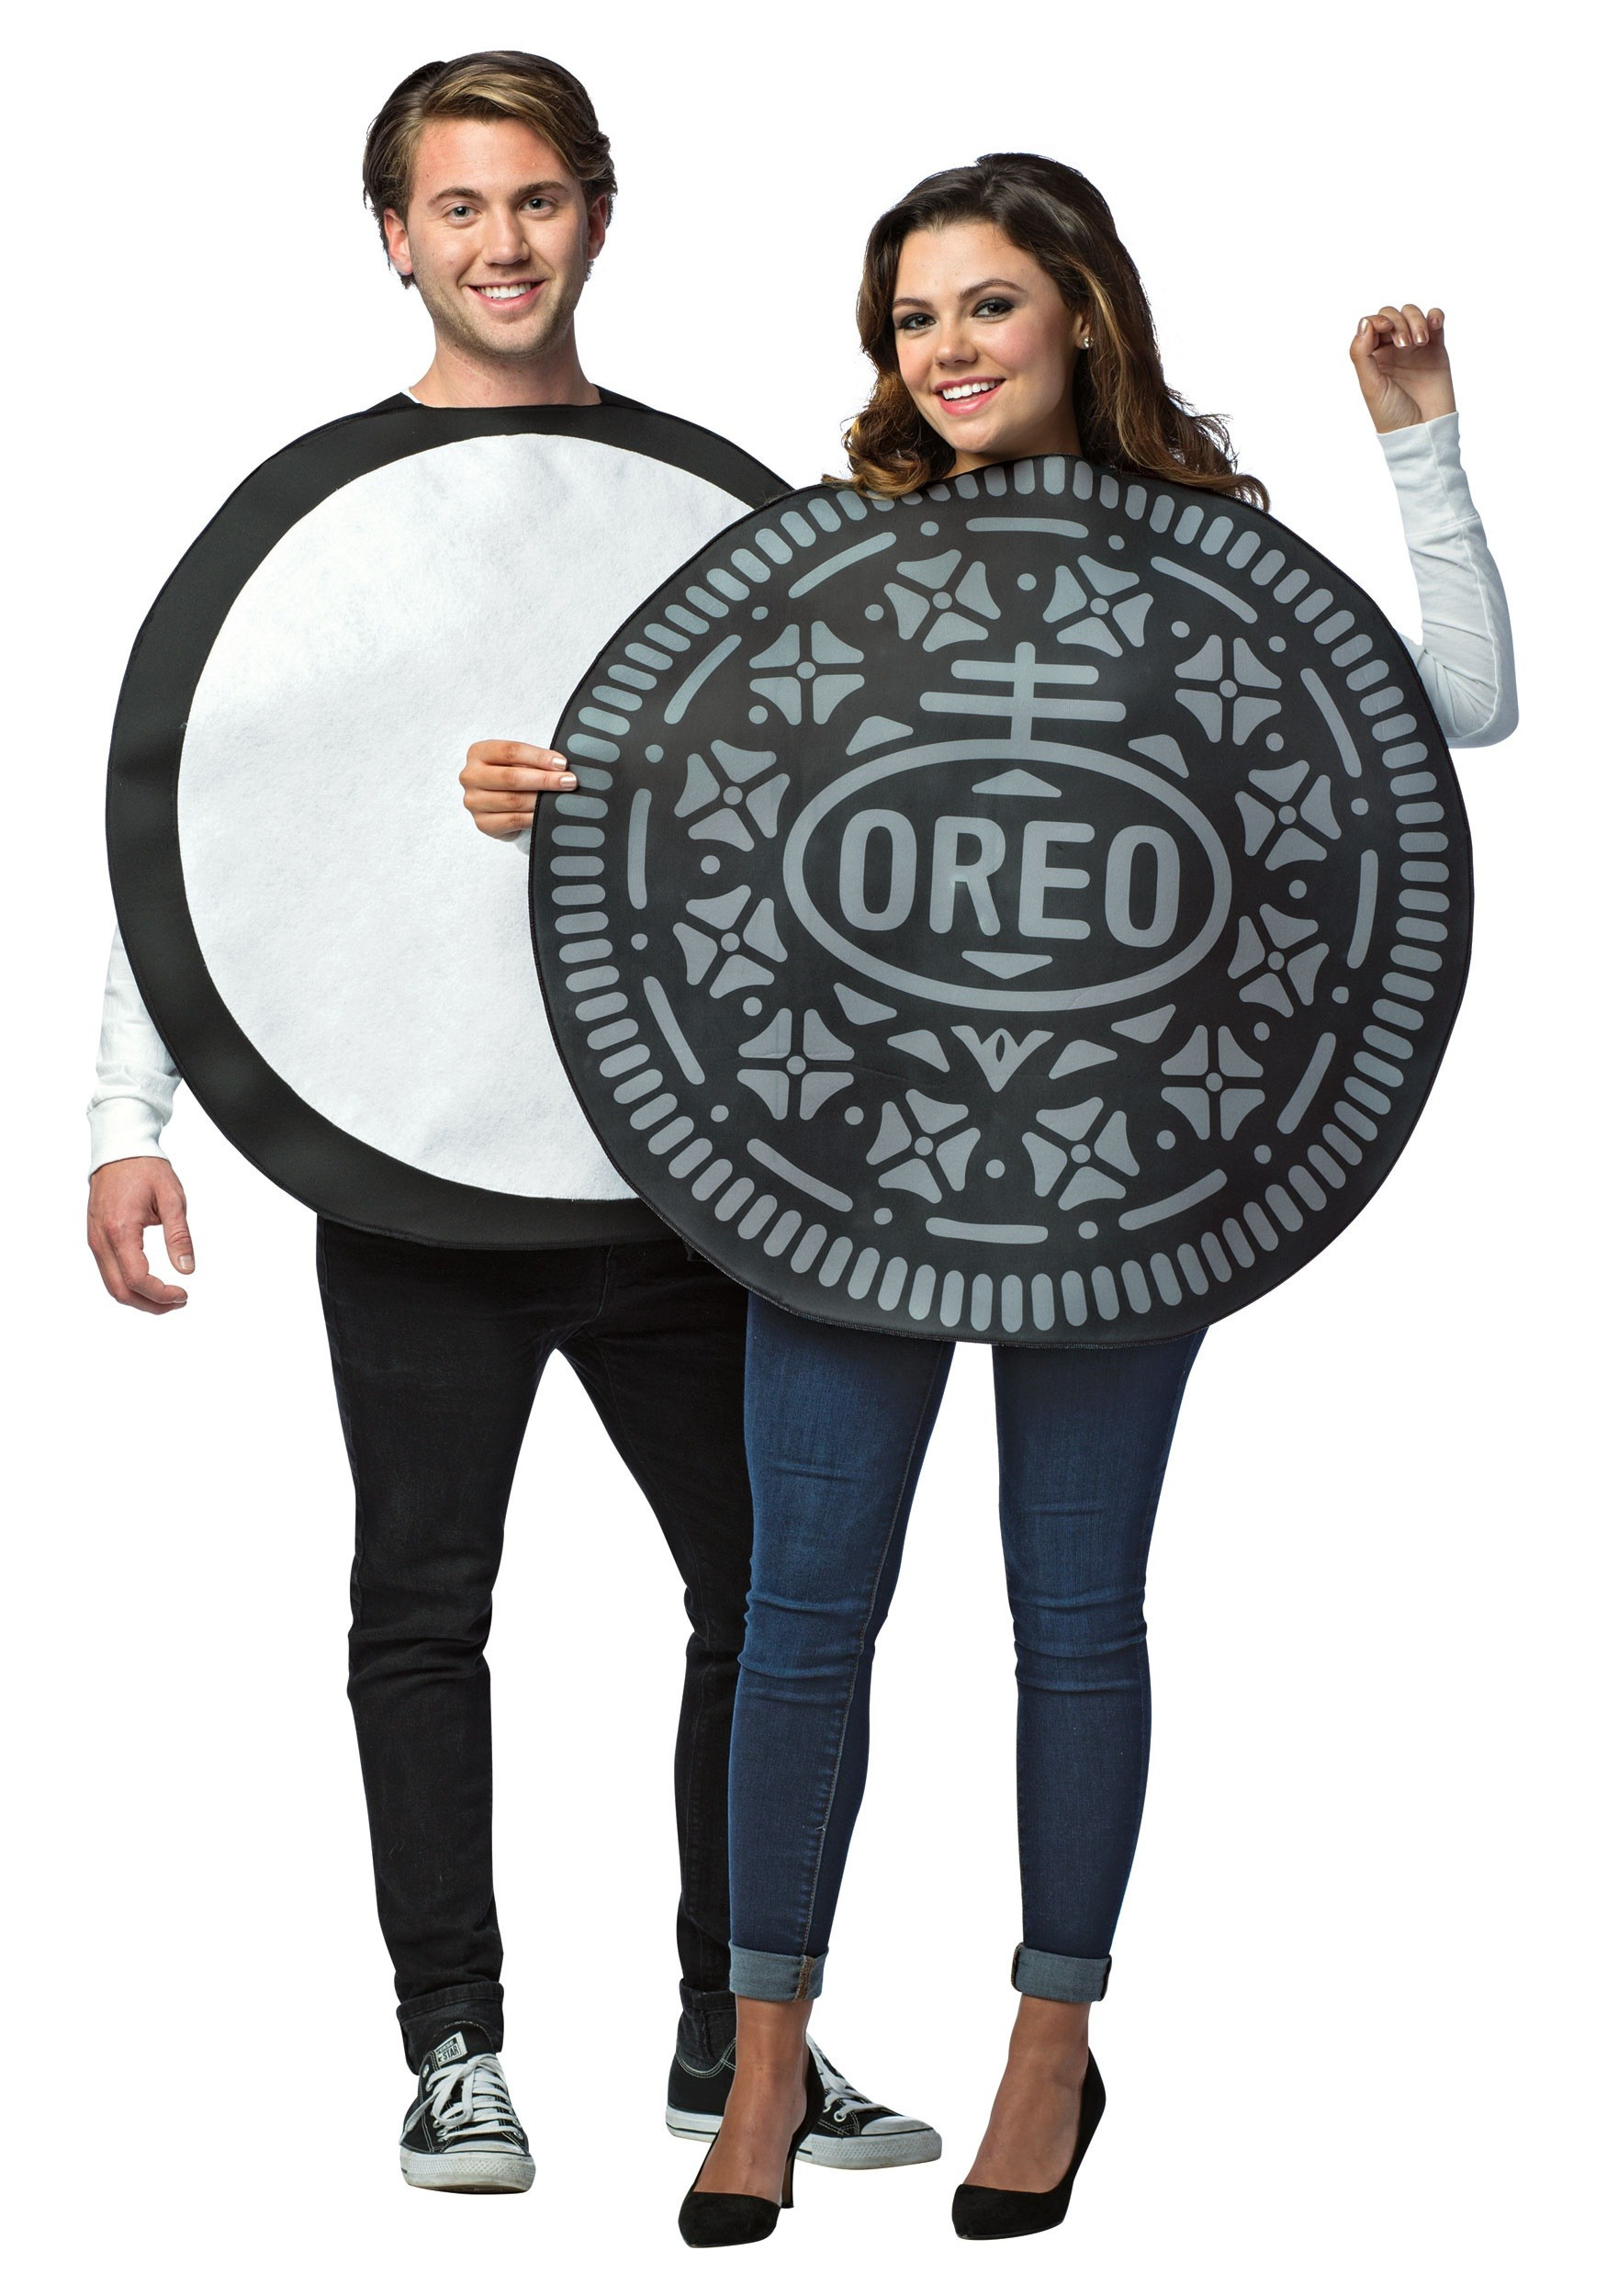 Halloween Costume Ideas Couples
 Adult Oreo Cookie Costume for Couples